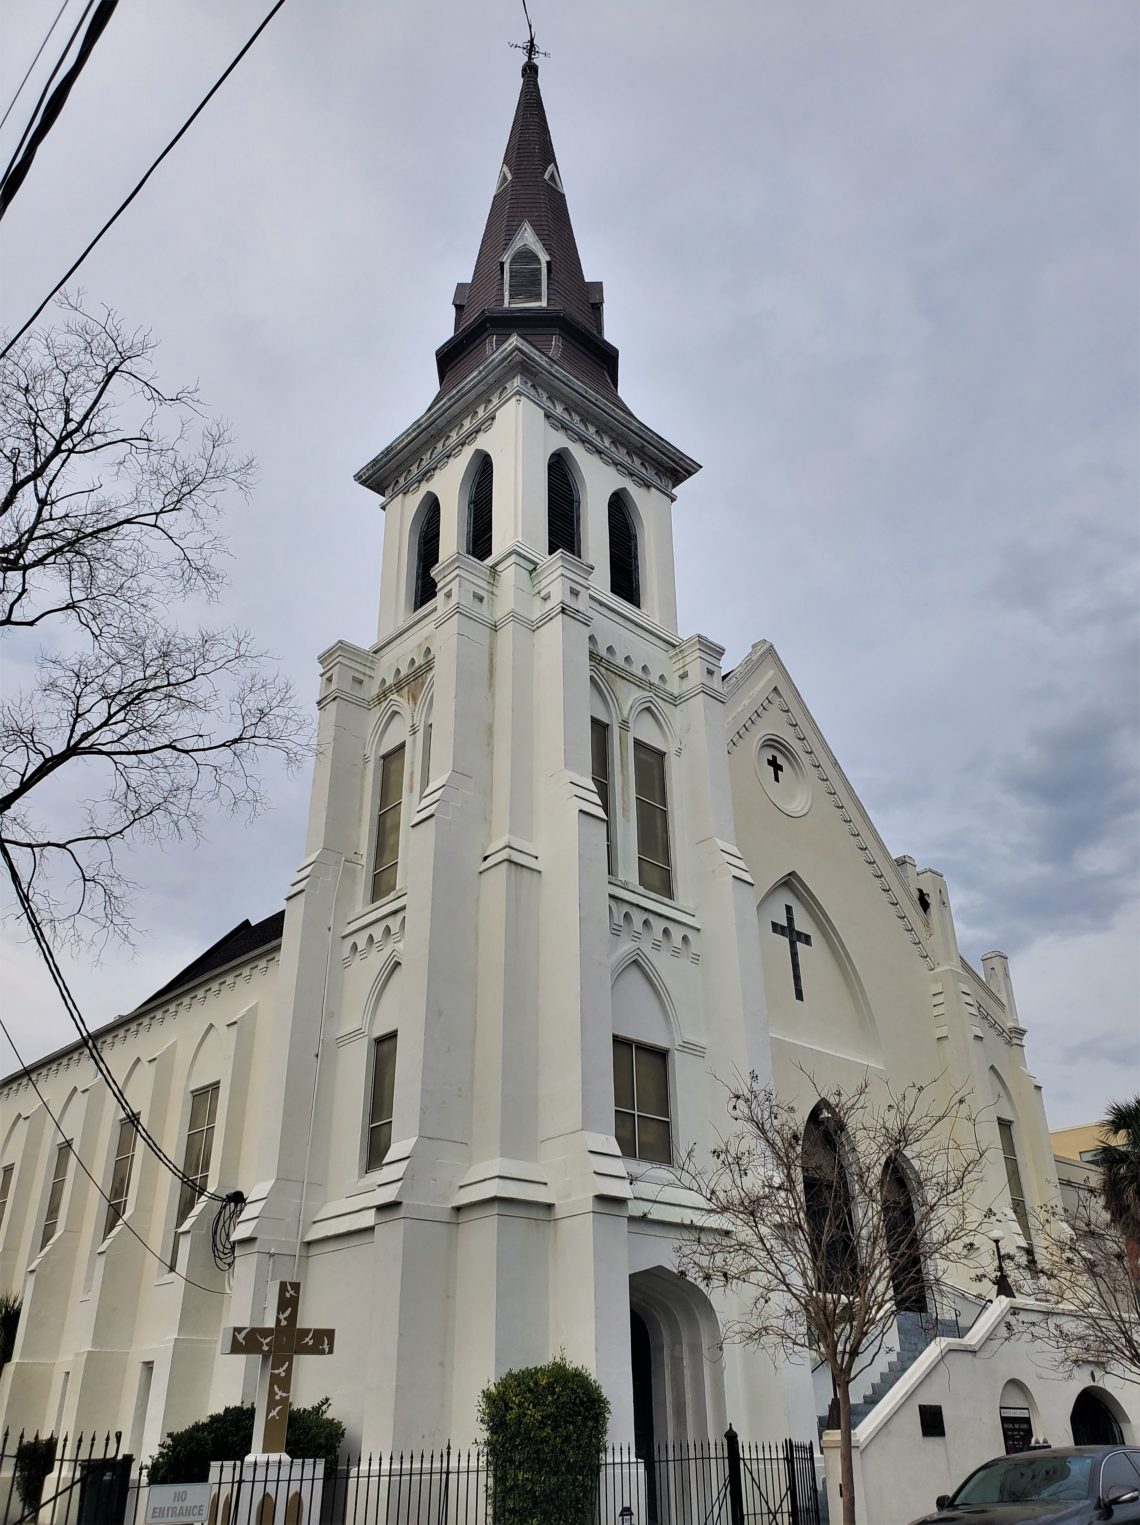 The Emanuel African Methodist Episcopal Church on Calhoun Street, more familiarly called Mother Emanuel. Founded in 1816, it is the oldest African Methodist Episcopal church in the Southern US. 